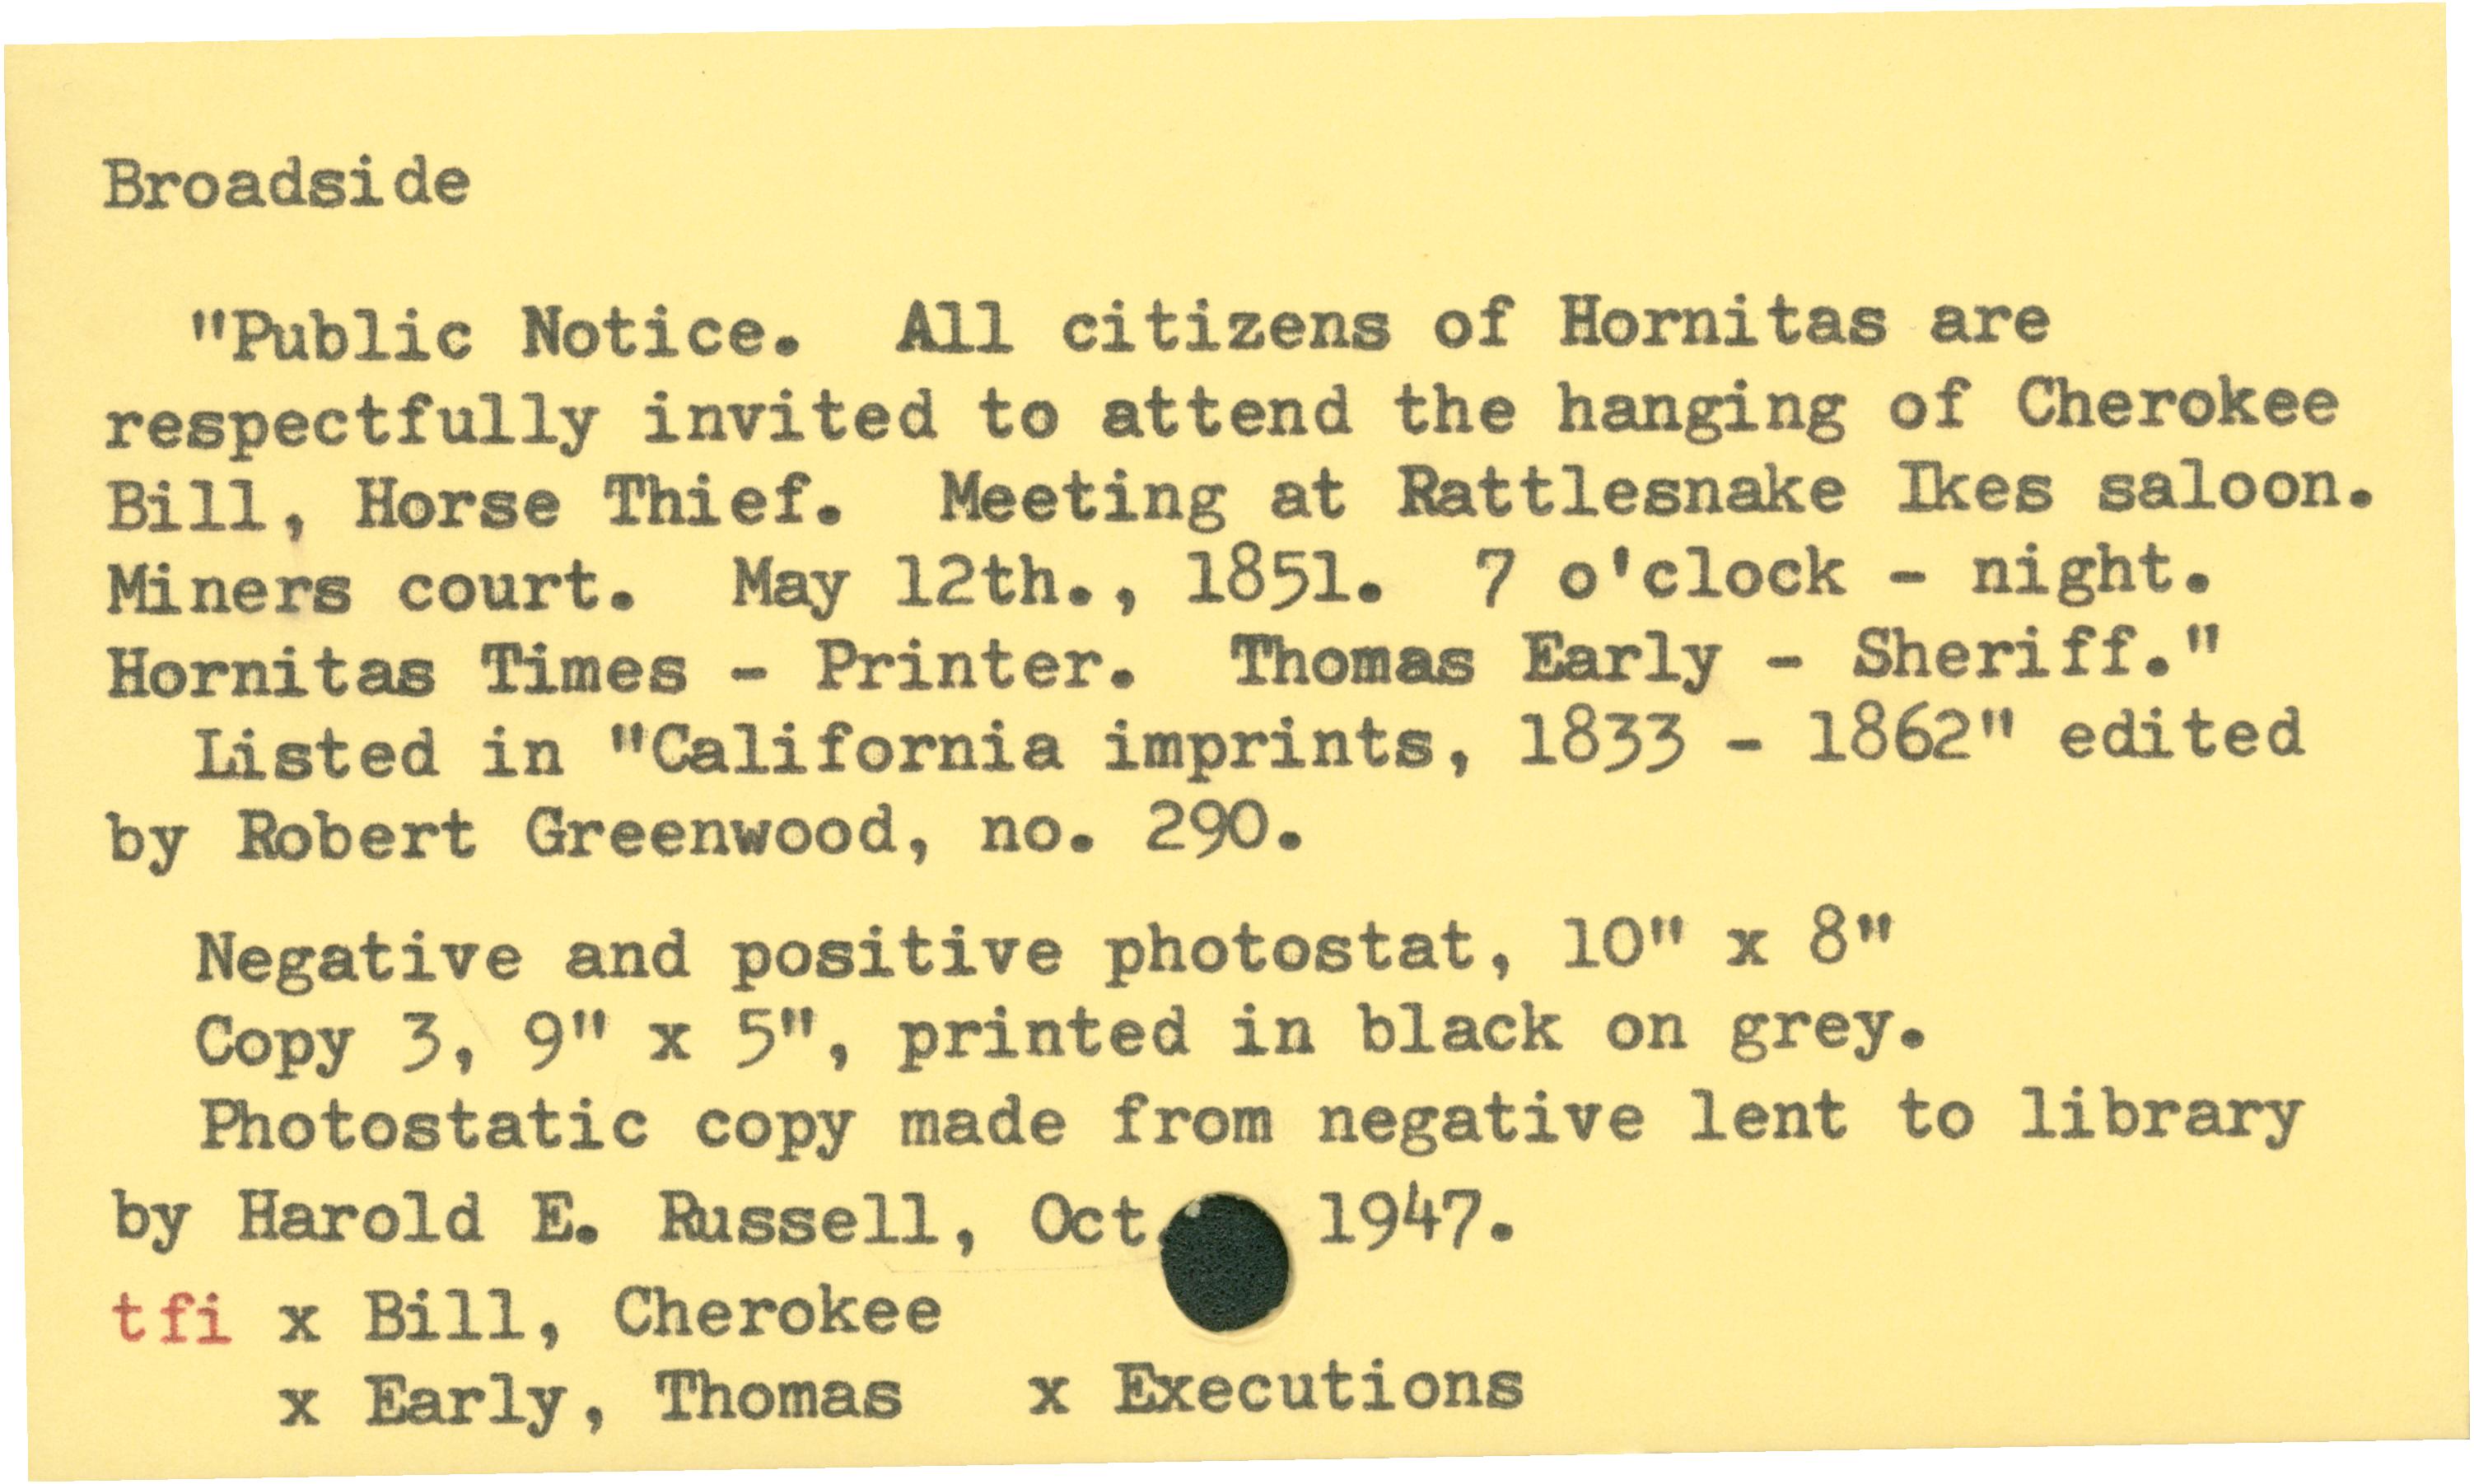 Broadside'Public Notice. All citizens of Hornitas are respectfully invited to attend the hanging of Cherokee Bill, Horse Thief. Meeting at Rattlesnake Ikes saloon. Miners Court. May 12, 1851. 7 o'clock - night. Hornitas Times - Printer. Thomas Early - Sheriff.'Listed in 'California imprints, 1833 - 1962' edited by Robert Greenwood, No, 290.Negative and positive Photostat, 10 x 8 in.Copy 3 9 x 5 in., printed in black on grey. Photostat copy made from negative lent to library by Harold E. Russell, Oct 1947.tfi x Bill, Cherokeex Early, Thomas x Executions